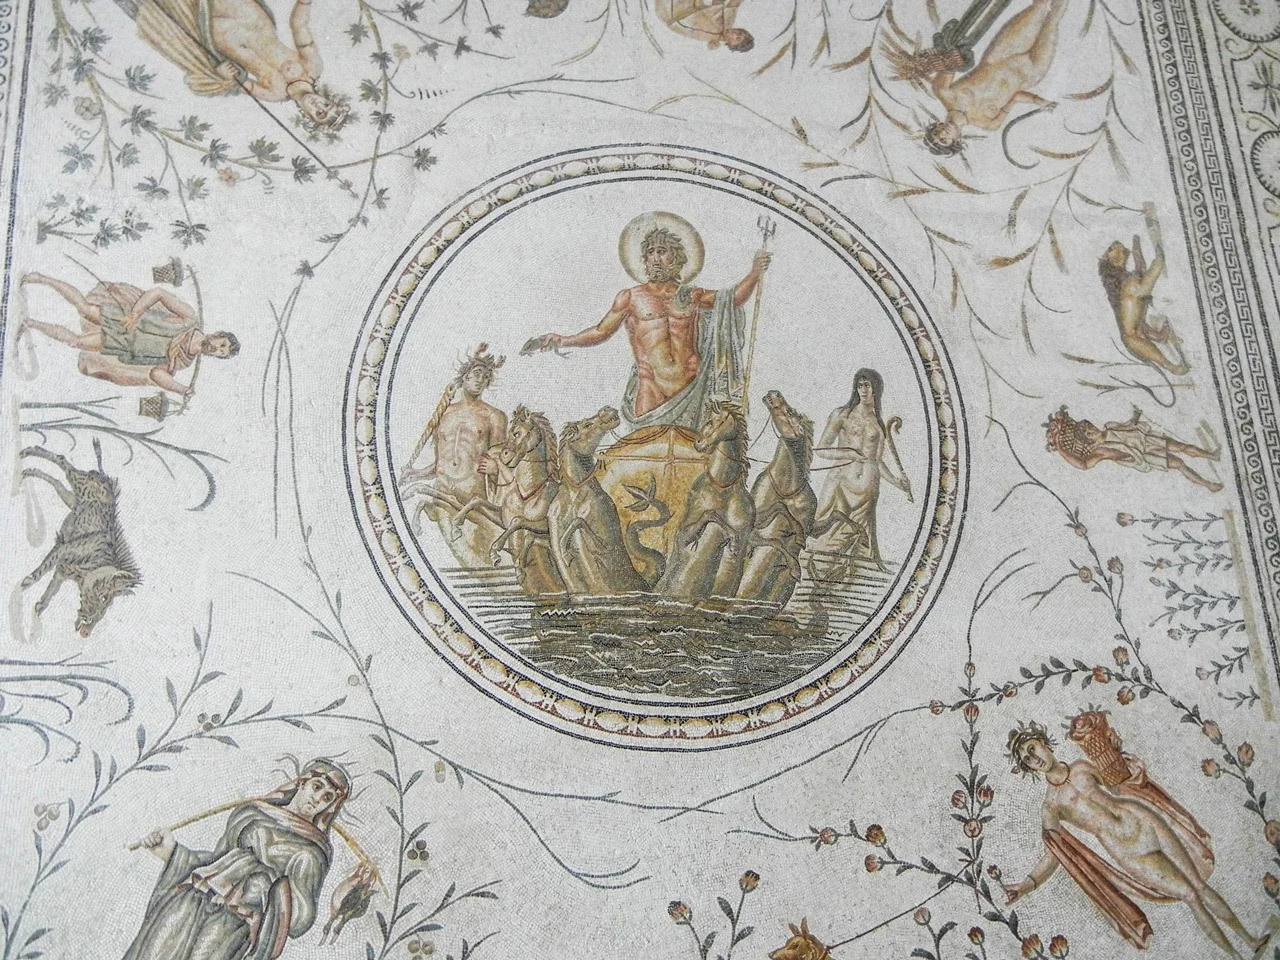 One of the many amazing Roman mosaics to be found at the Bardo Museum in Tunis...a must do.